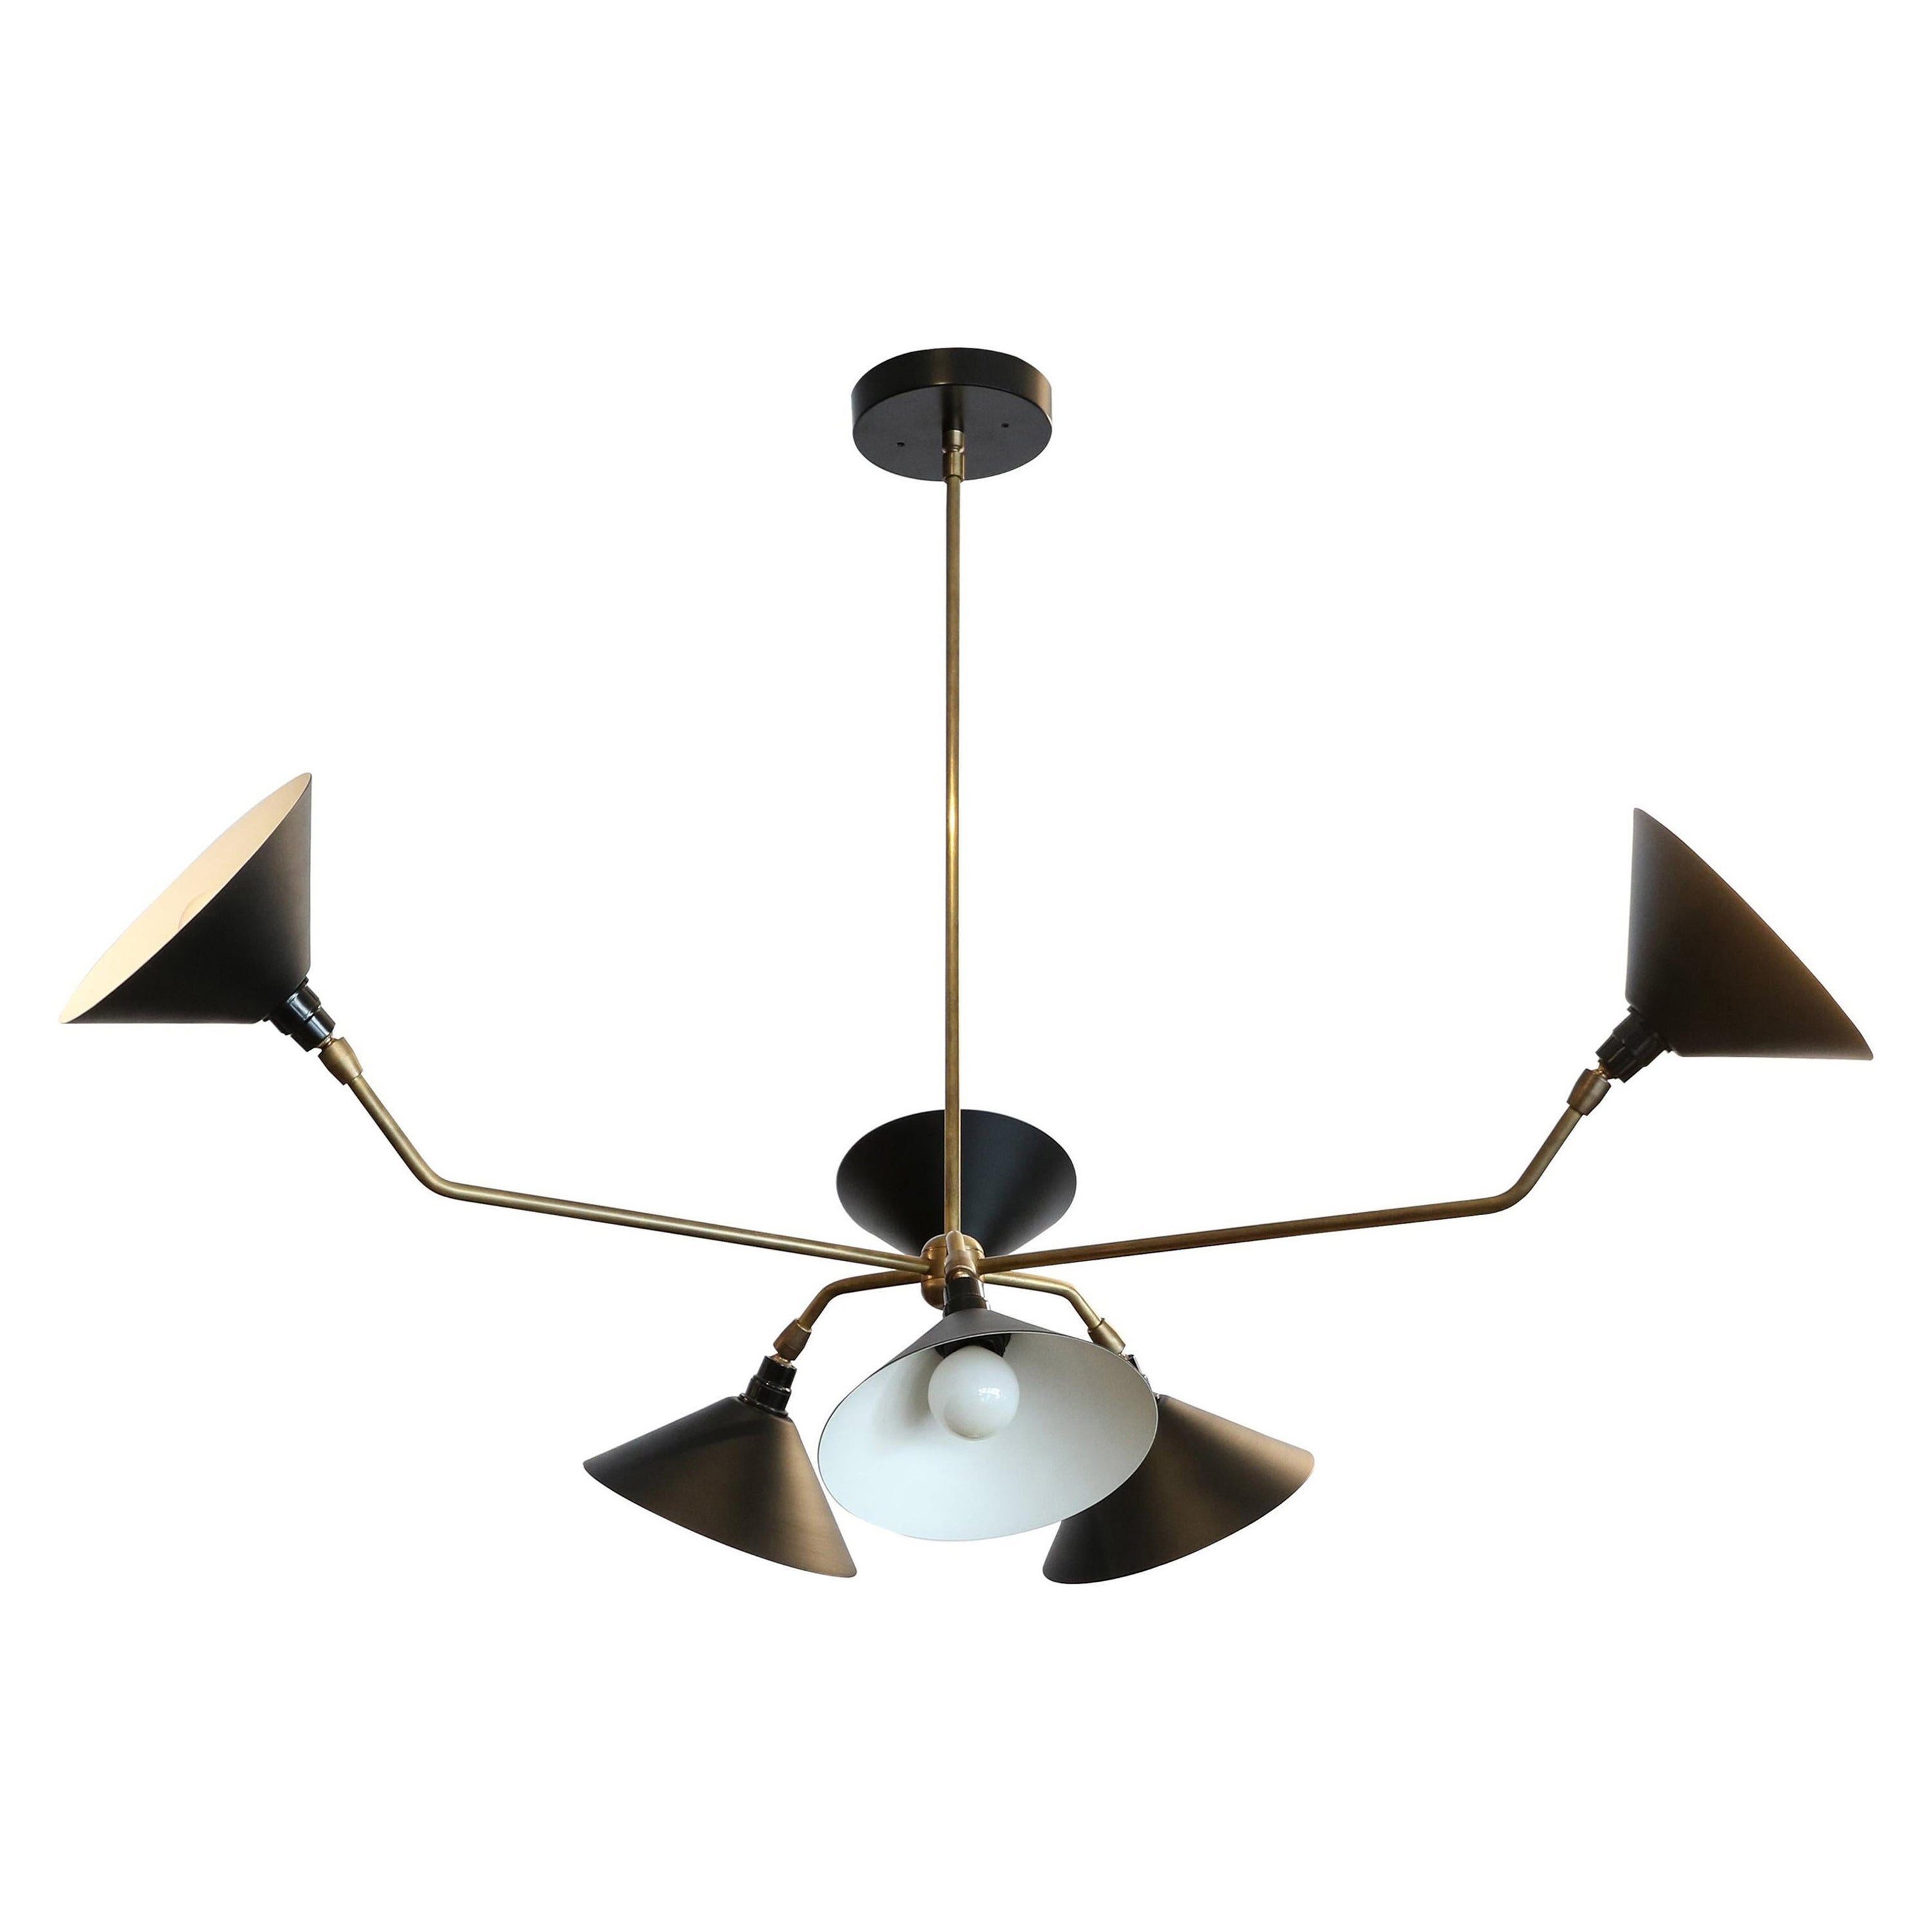 Custom 6 Arm Black Metal & Brass Midcentury Style Chandelier by Adesso Imports For Sale